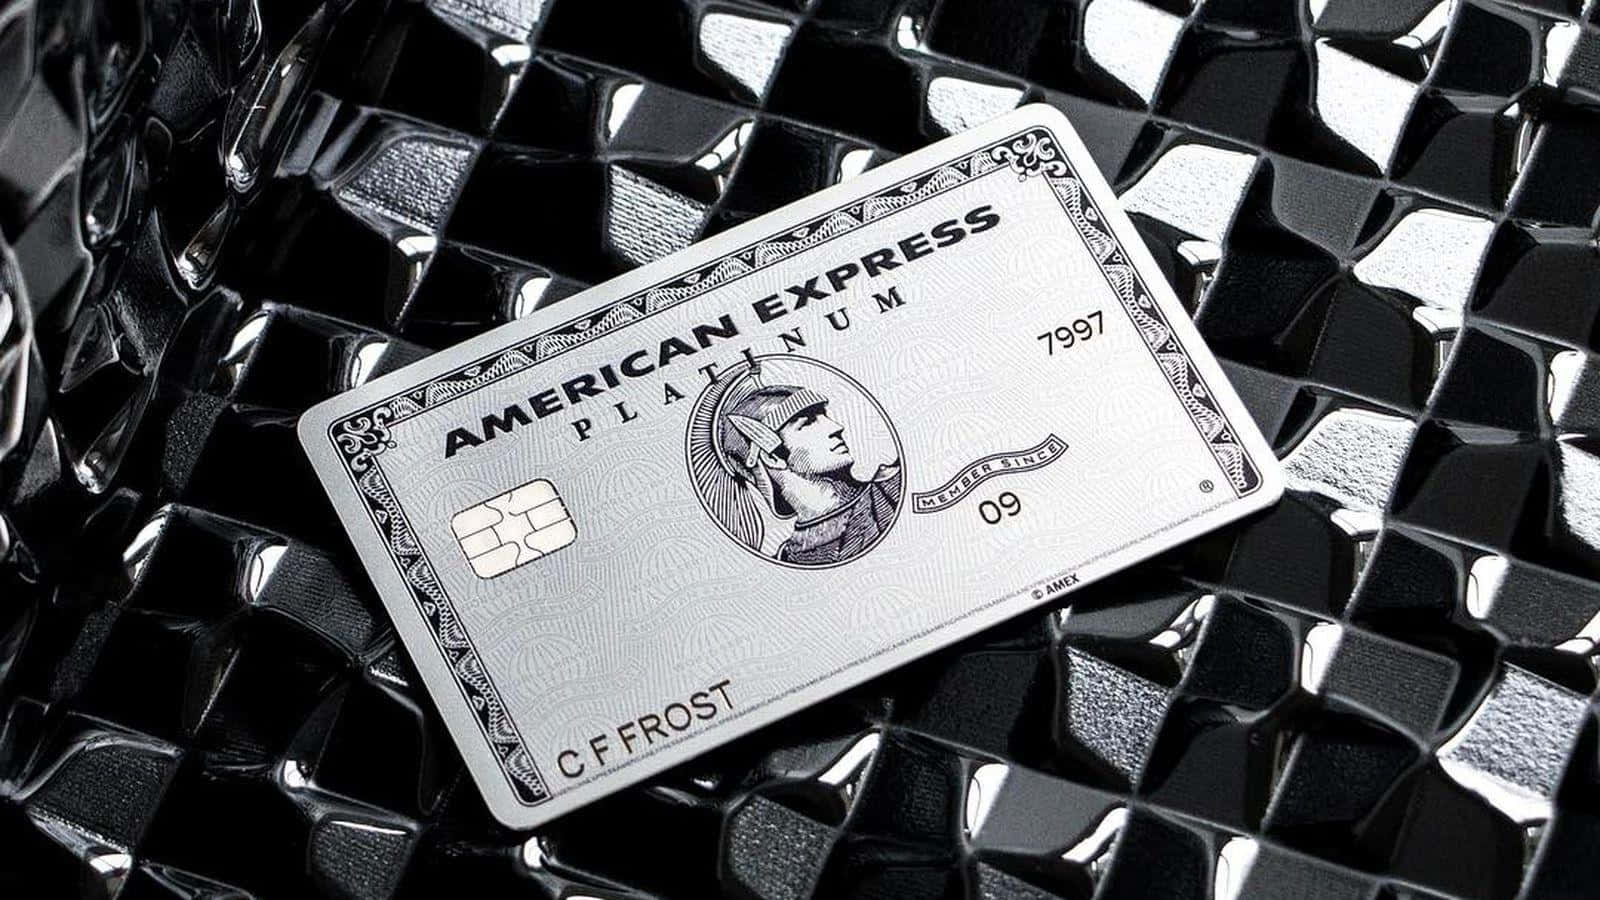 Small business continuing to thrive with the help of American Express